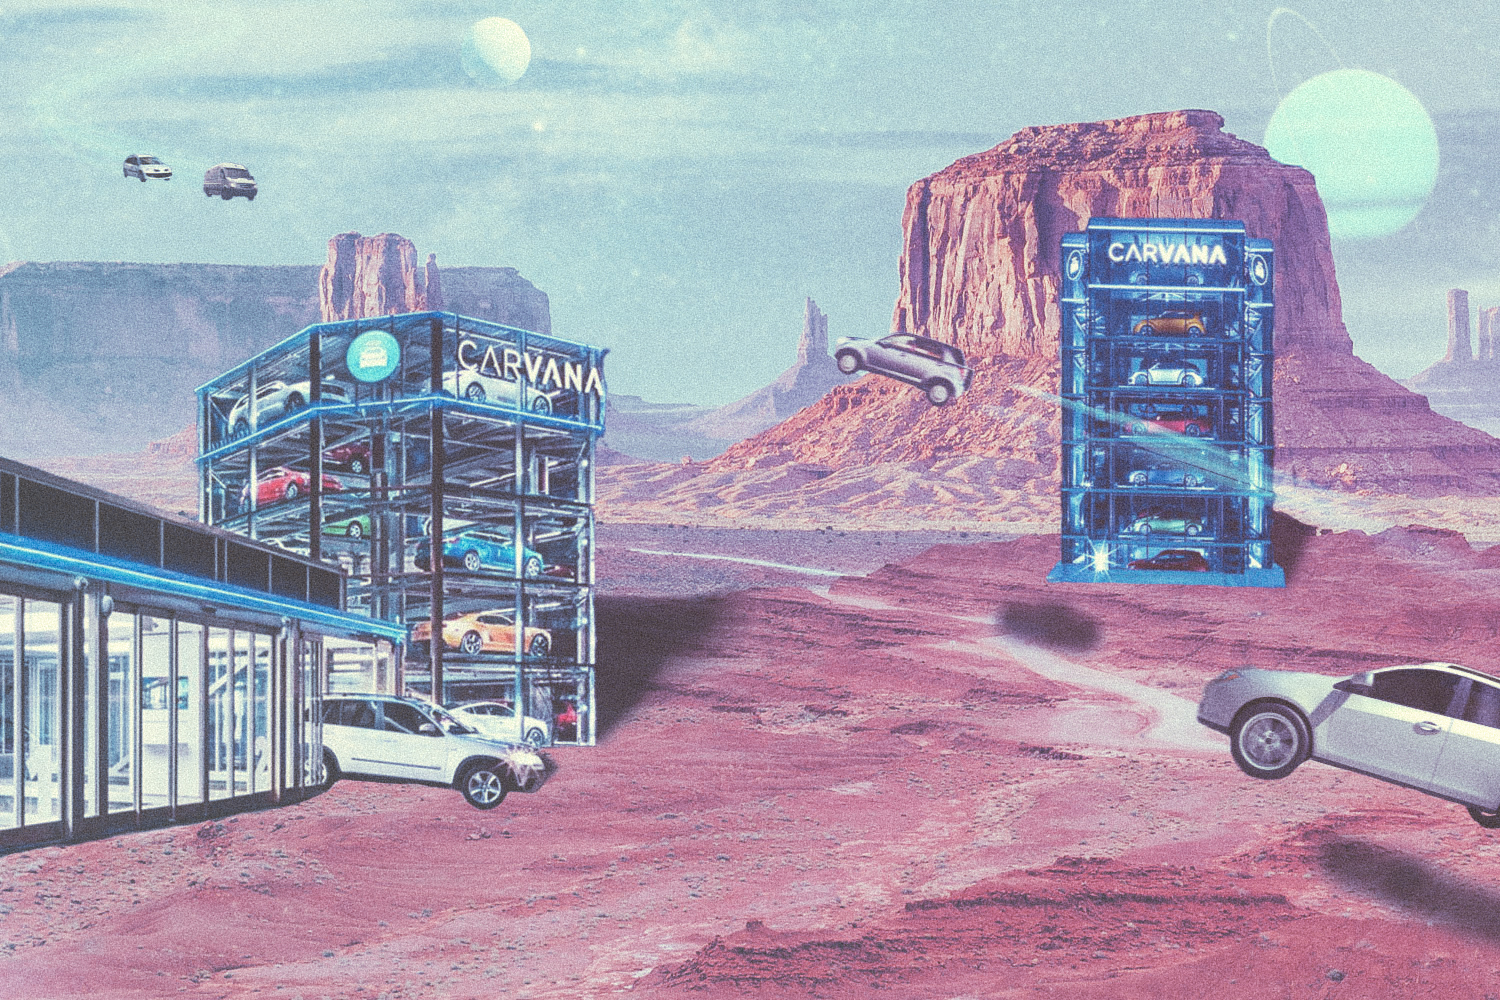 Carvana car vending machines in space on another planet with vehicles floating in the air